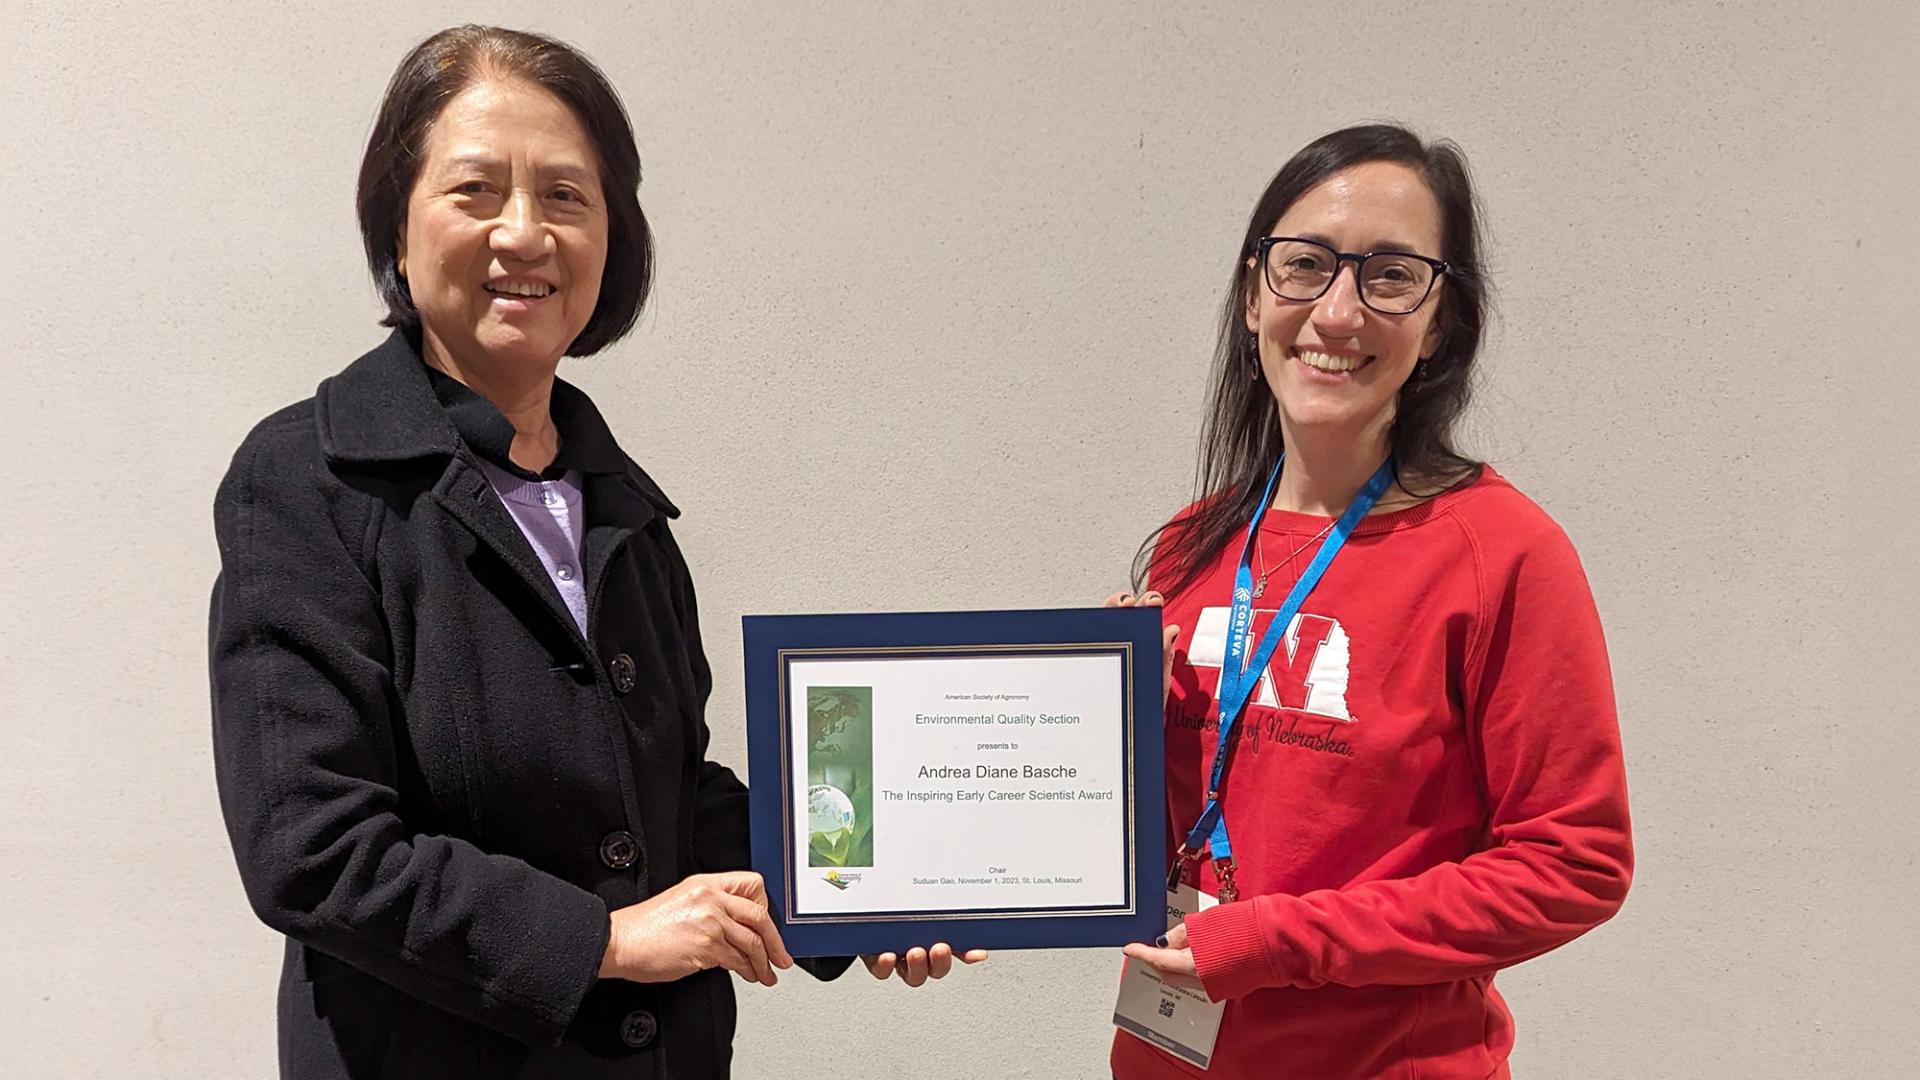 Suduan Gao, Chair of the Environmental Quality Section of the American Society of Agronomy (left), awards Andrea Basche the ASA Environmental Quality Section Inspiring Early Career Scientist Award